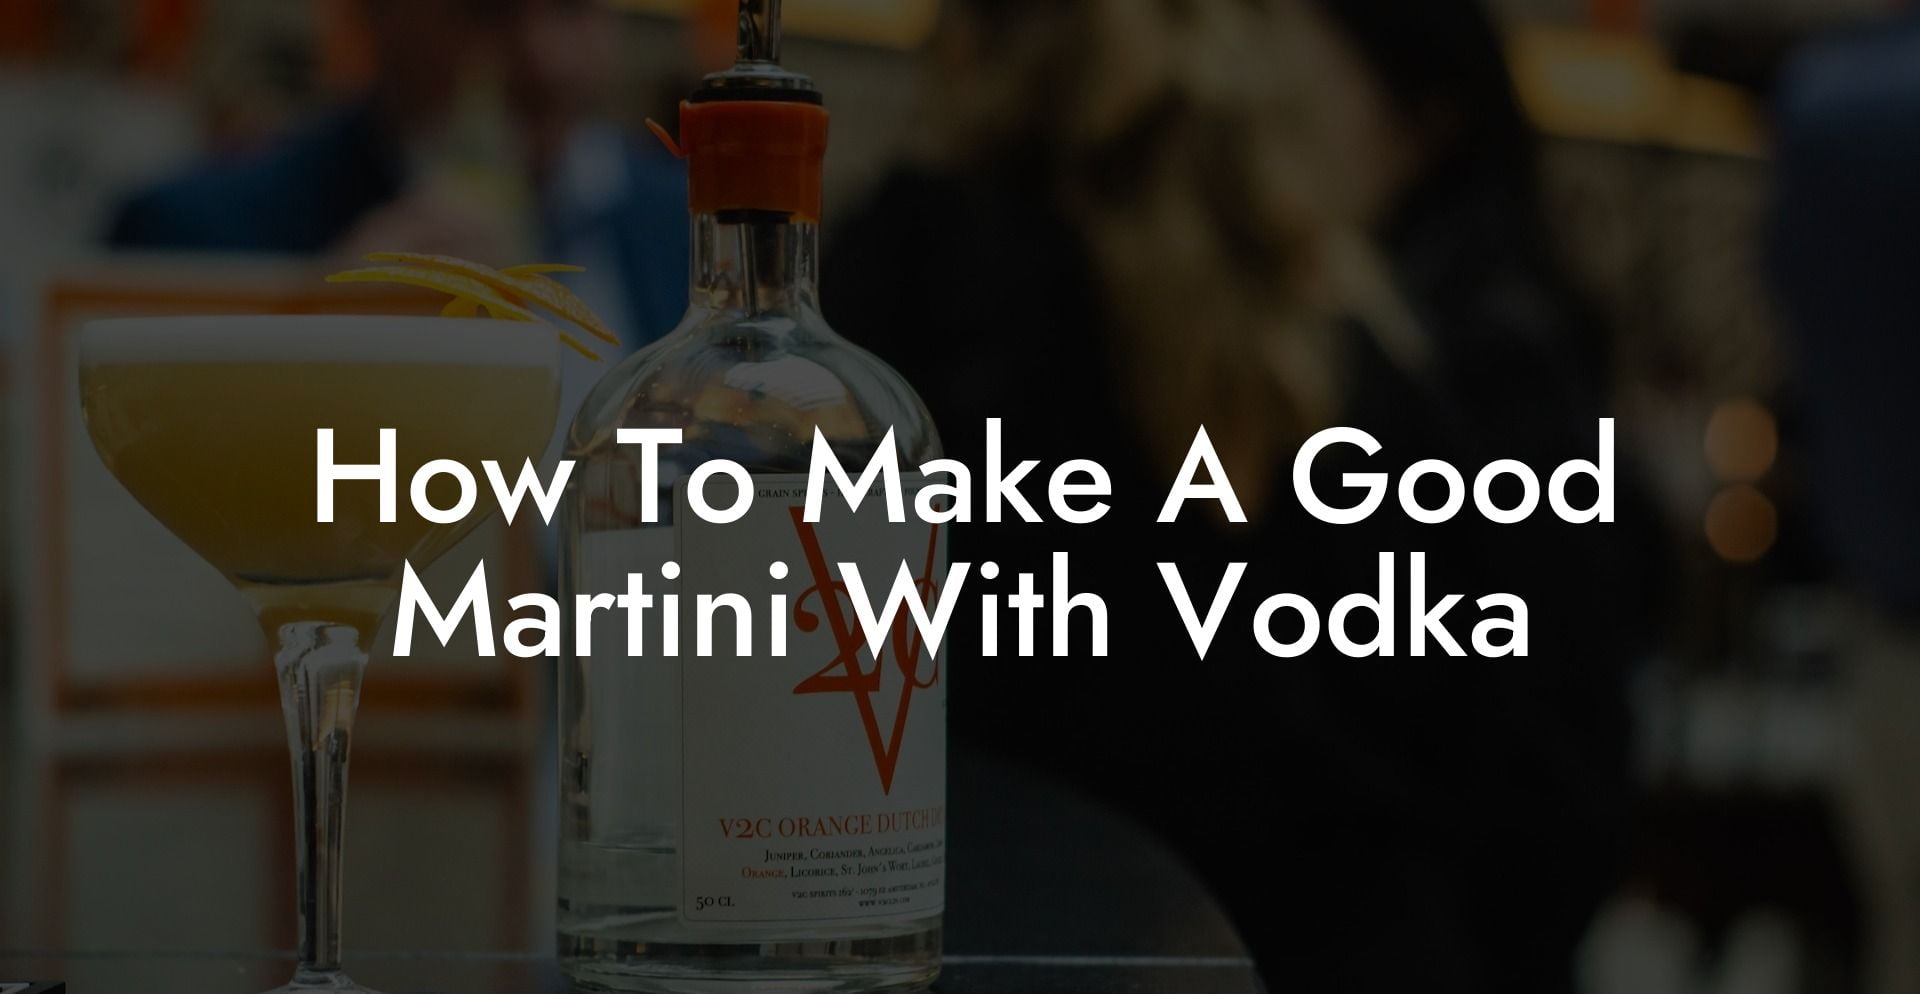 How To Make A Good Martini With Vodka